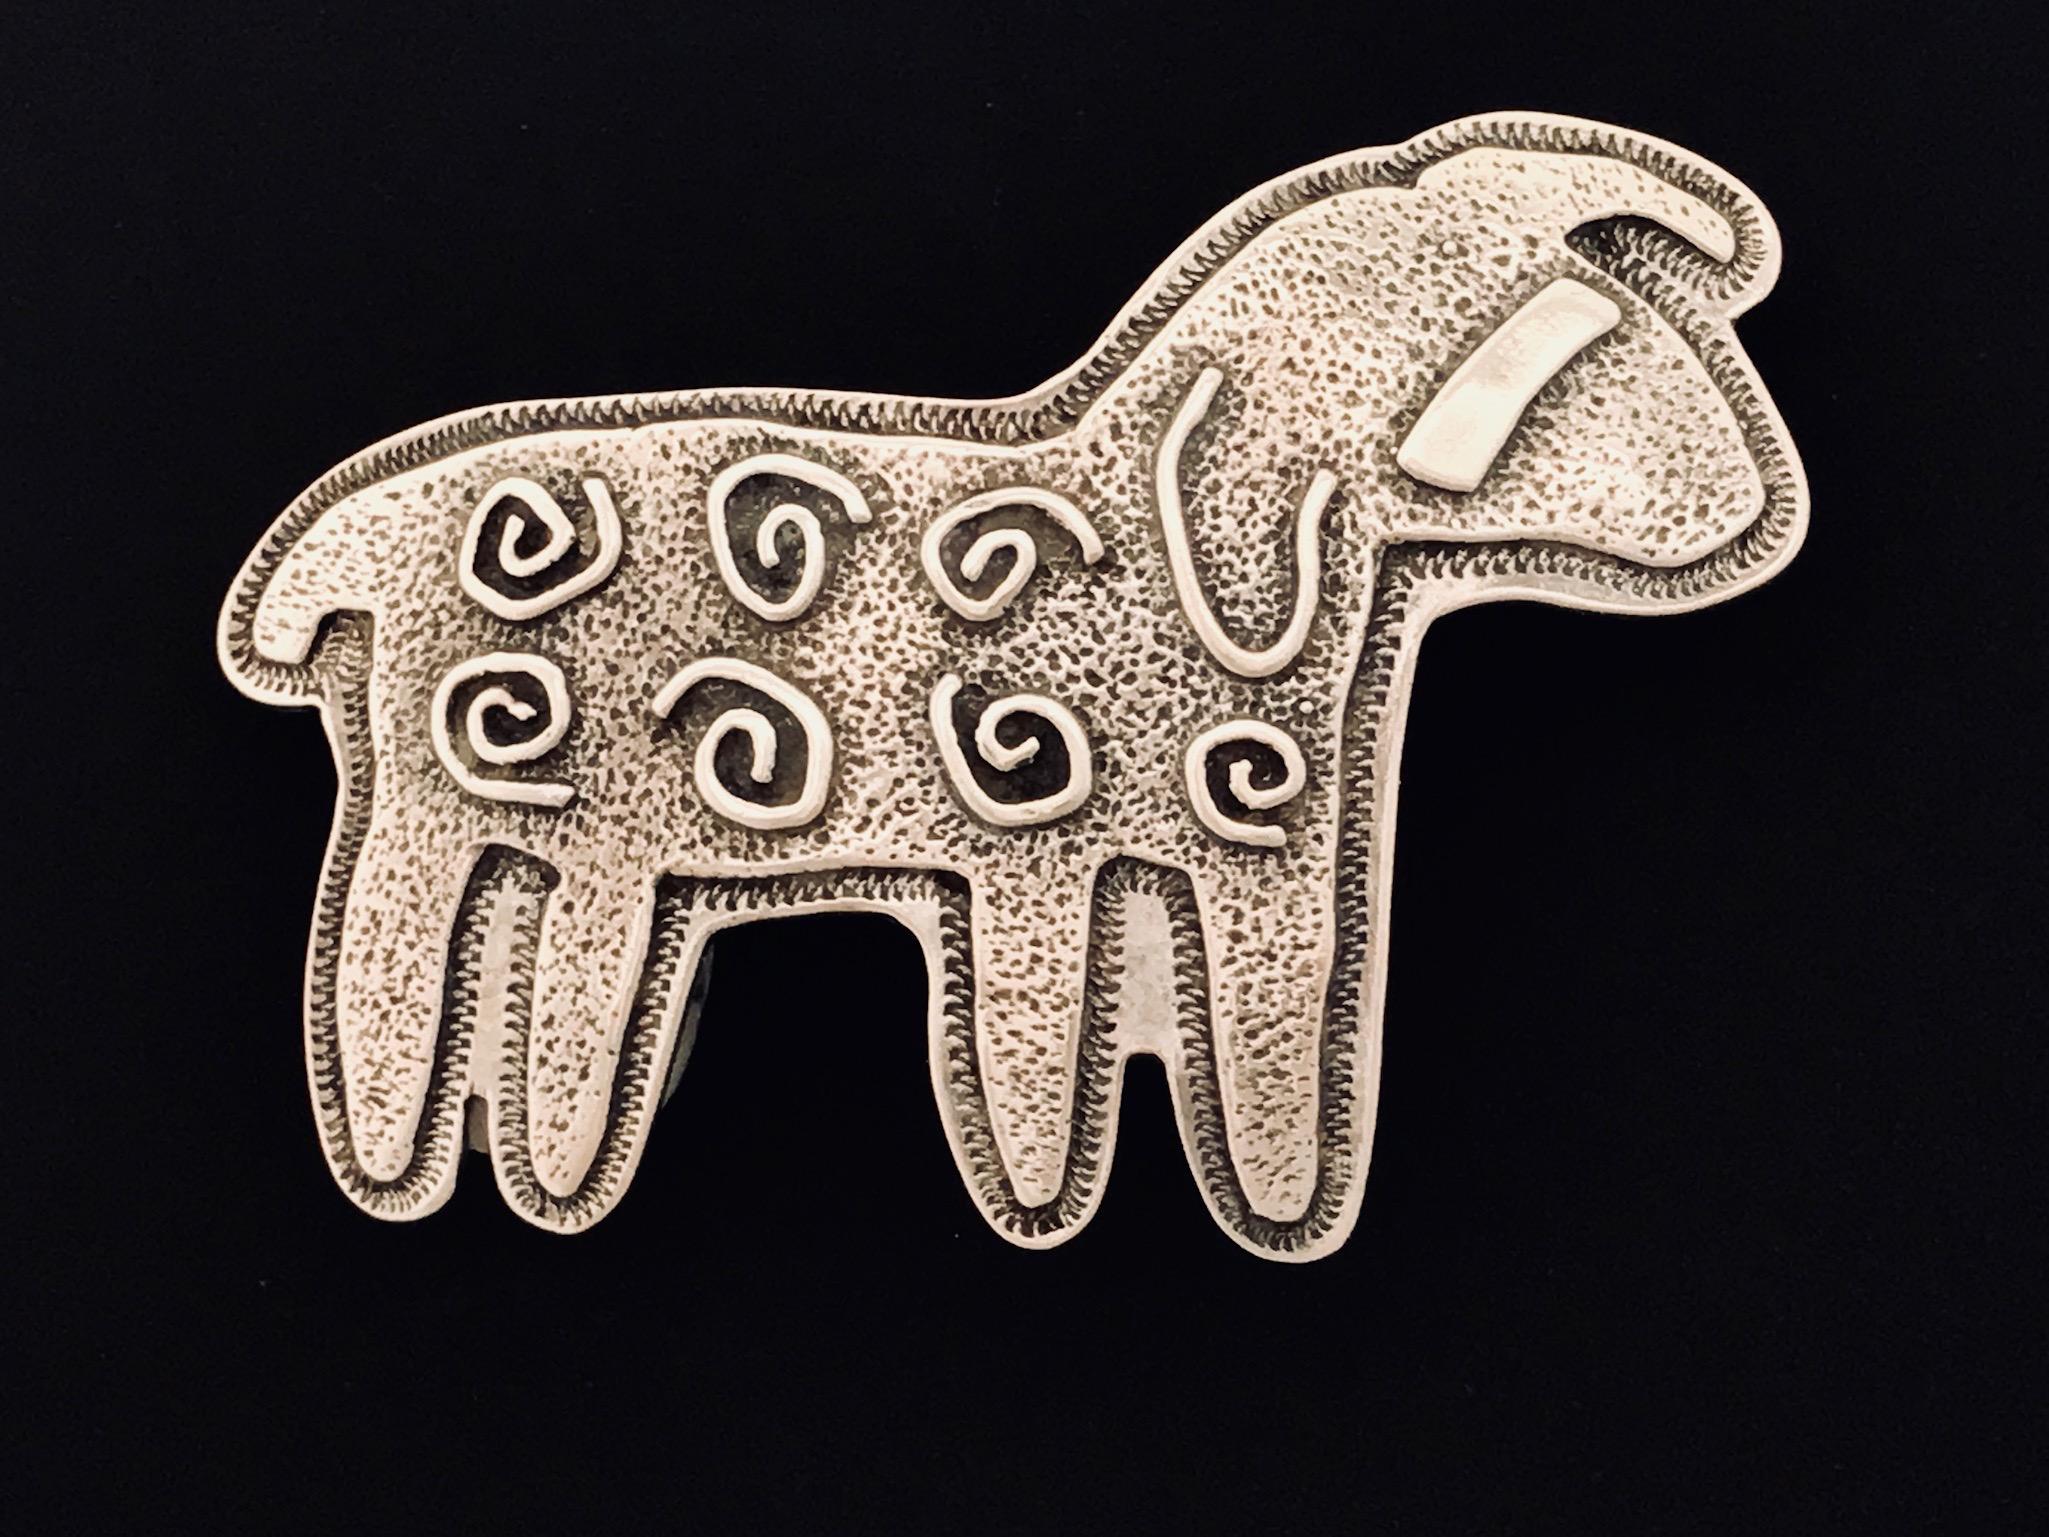 Curly Sheep, Sterling silver pin pendant Melanie Yazzie Navajo, Native American

Melanie A. Yazzie (Navajo-Diné) is a highly regarded multimedia artist known for her printmaking, paintings, sculpture, and jewelry designs.

She has exhibited,